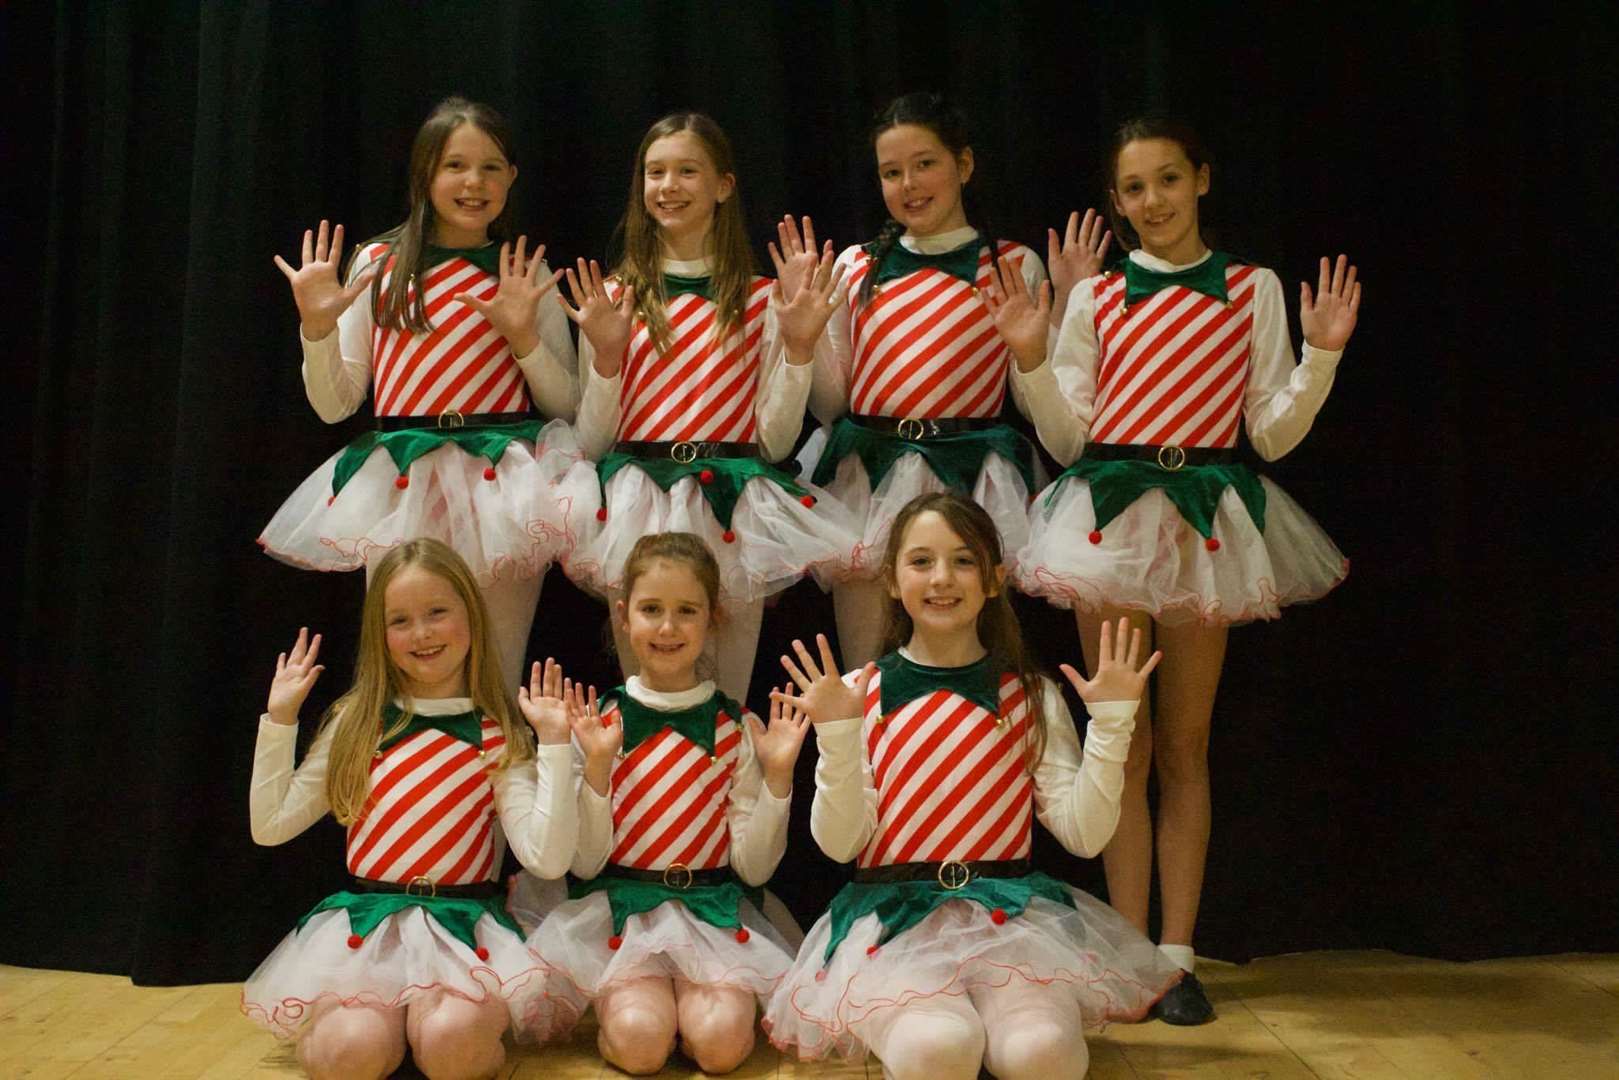 The dance team for the panto.